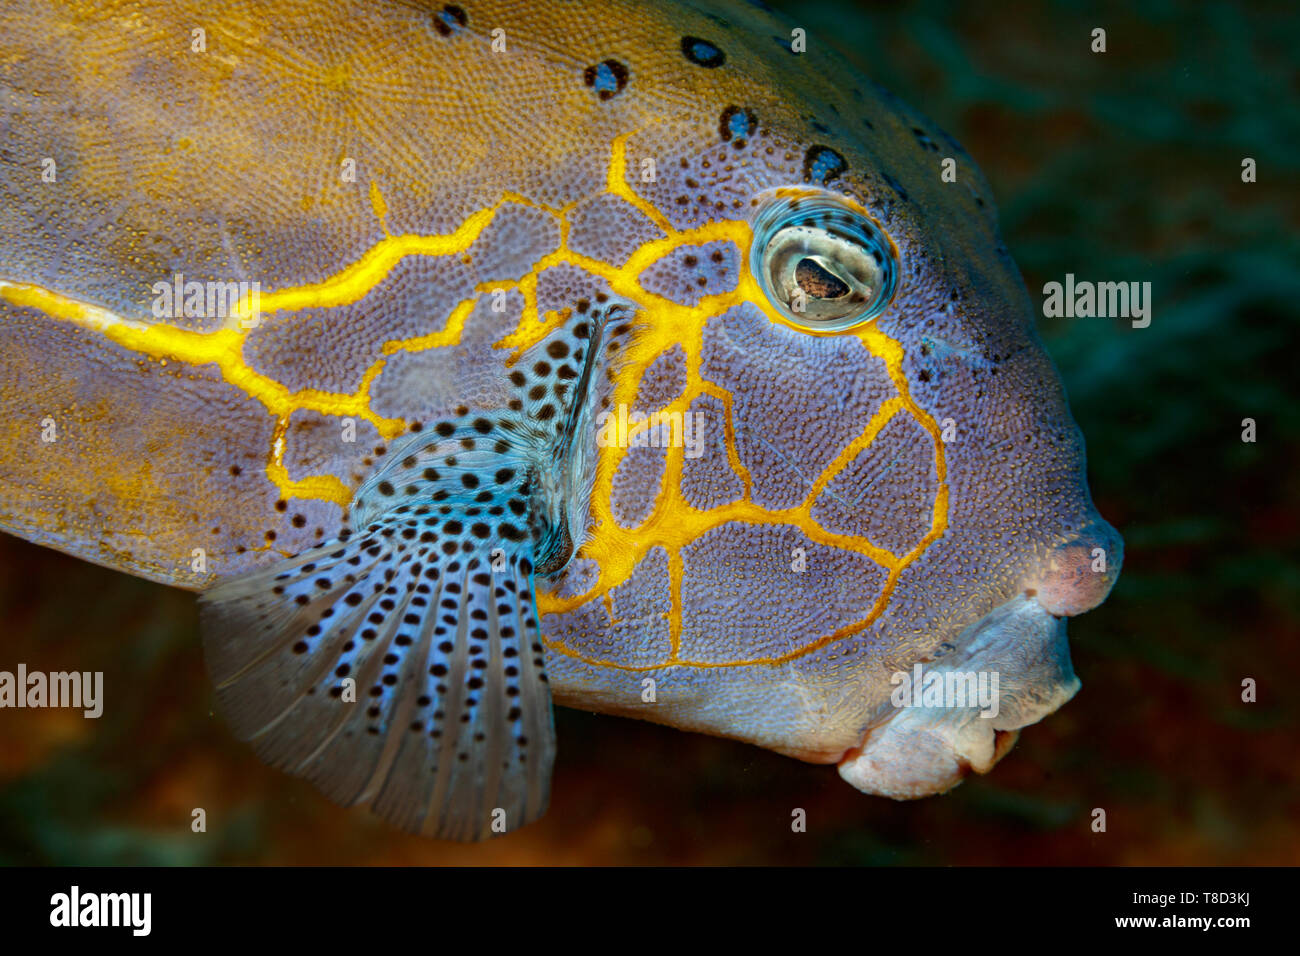 Closeup of head of coral reef fish in Indonesia with turquoise with with black spot fins and ring around eye and yellow pattern on side of face Stock Photo